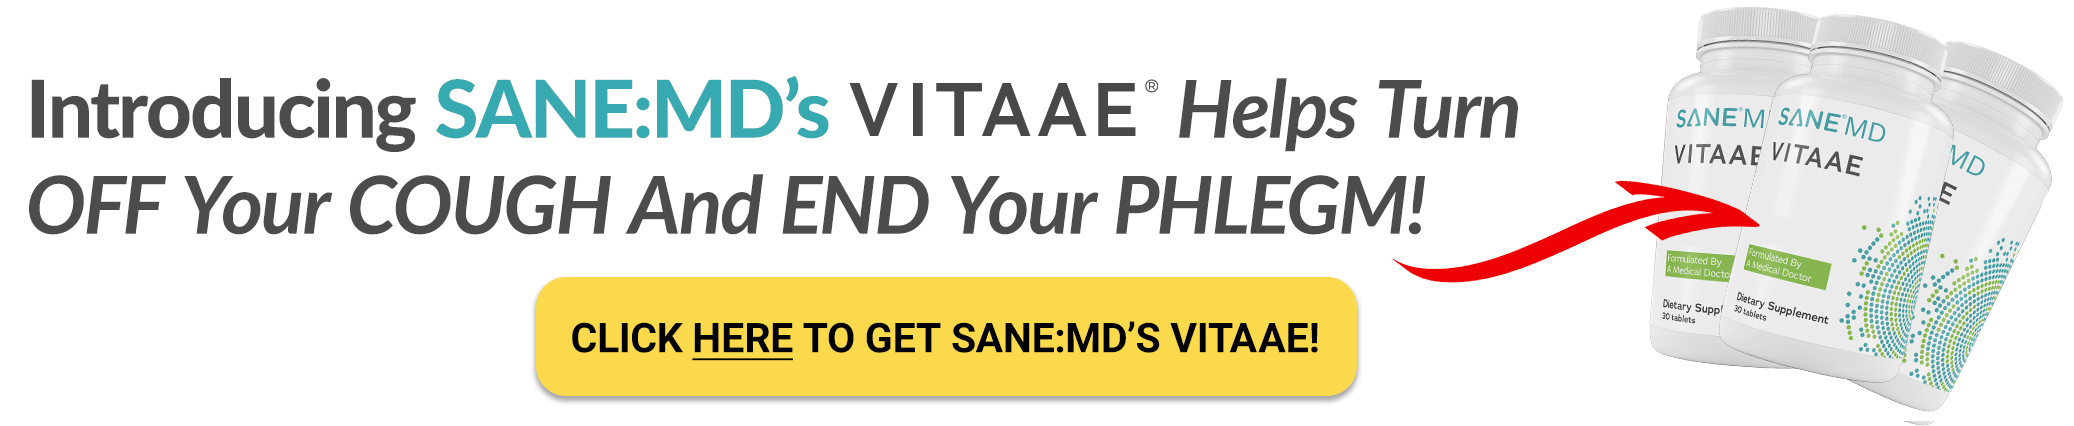 Introducing SANE:MD’s Vitaae. Helps Turn OFF Your COUGH And END Your PHLEGM!